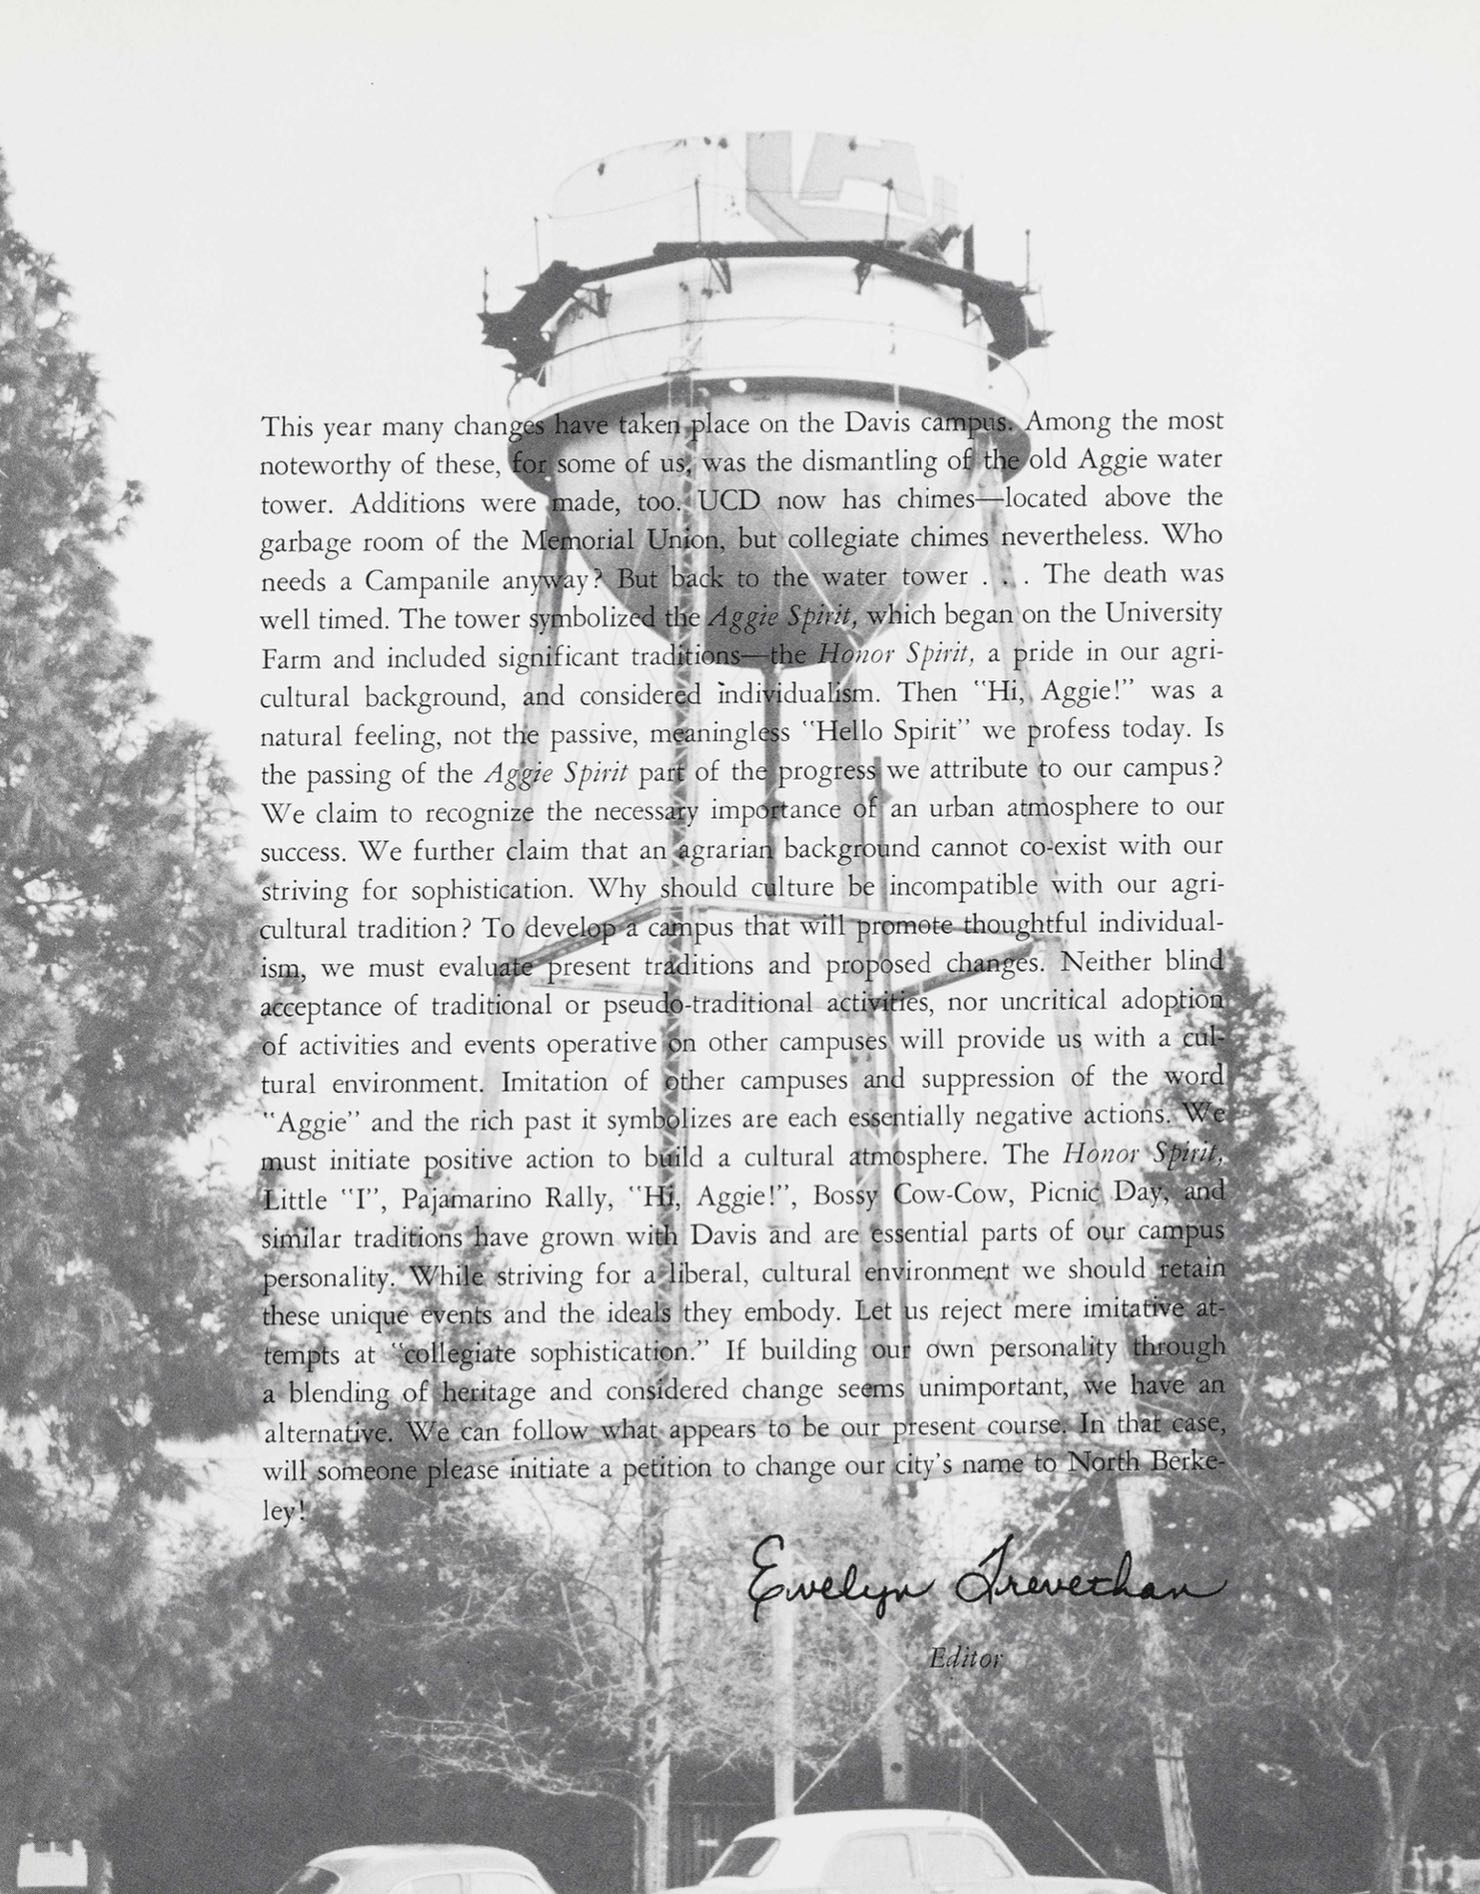 Page from a yearbook with a water tower being dismantled behind the text